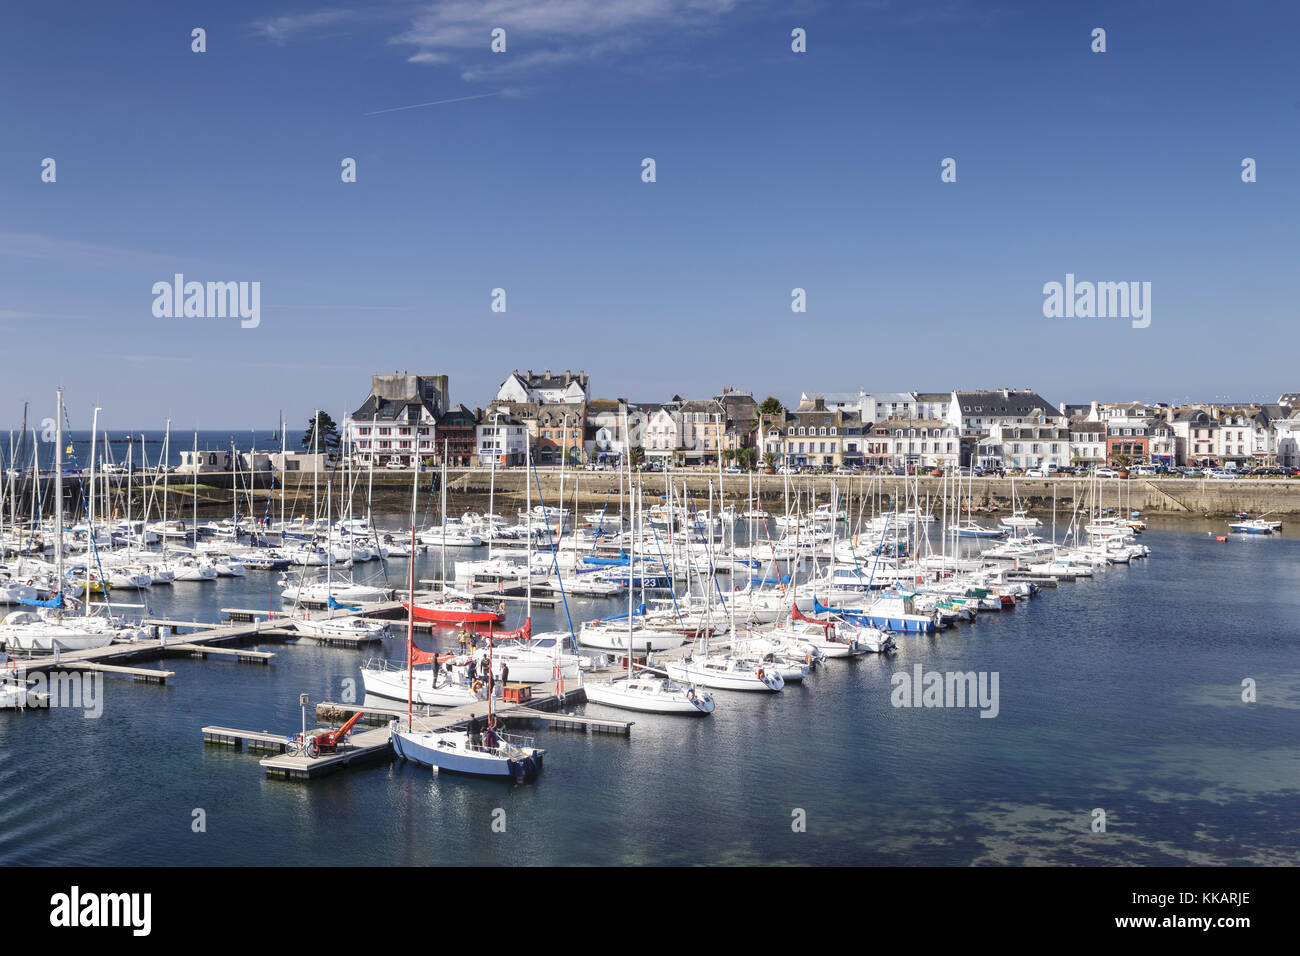 Concarneau, Finistere, Brittany, France, Europe. Stock Photo